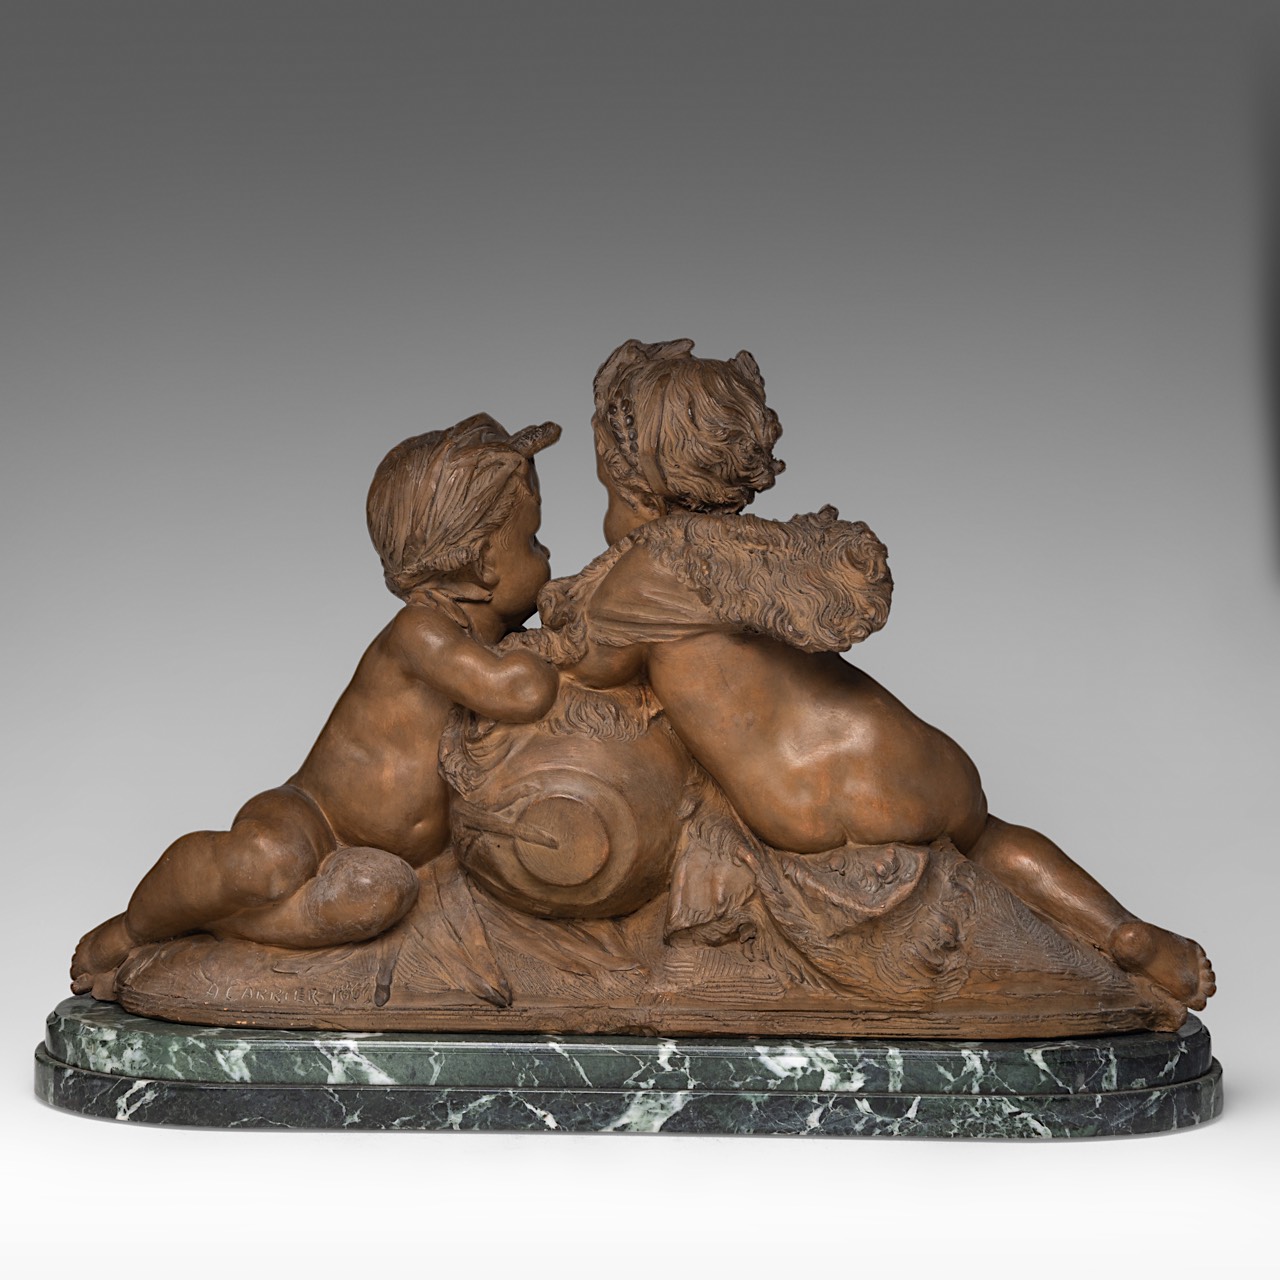 Carrier-Belleuse (1824-1887), two putti by the fountain, terracotta on a marble base, H 43 - W 68 cm - Bild 5 aus 10